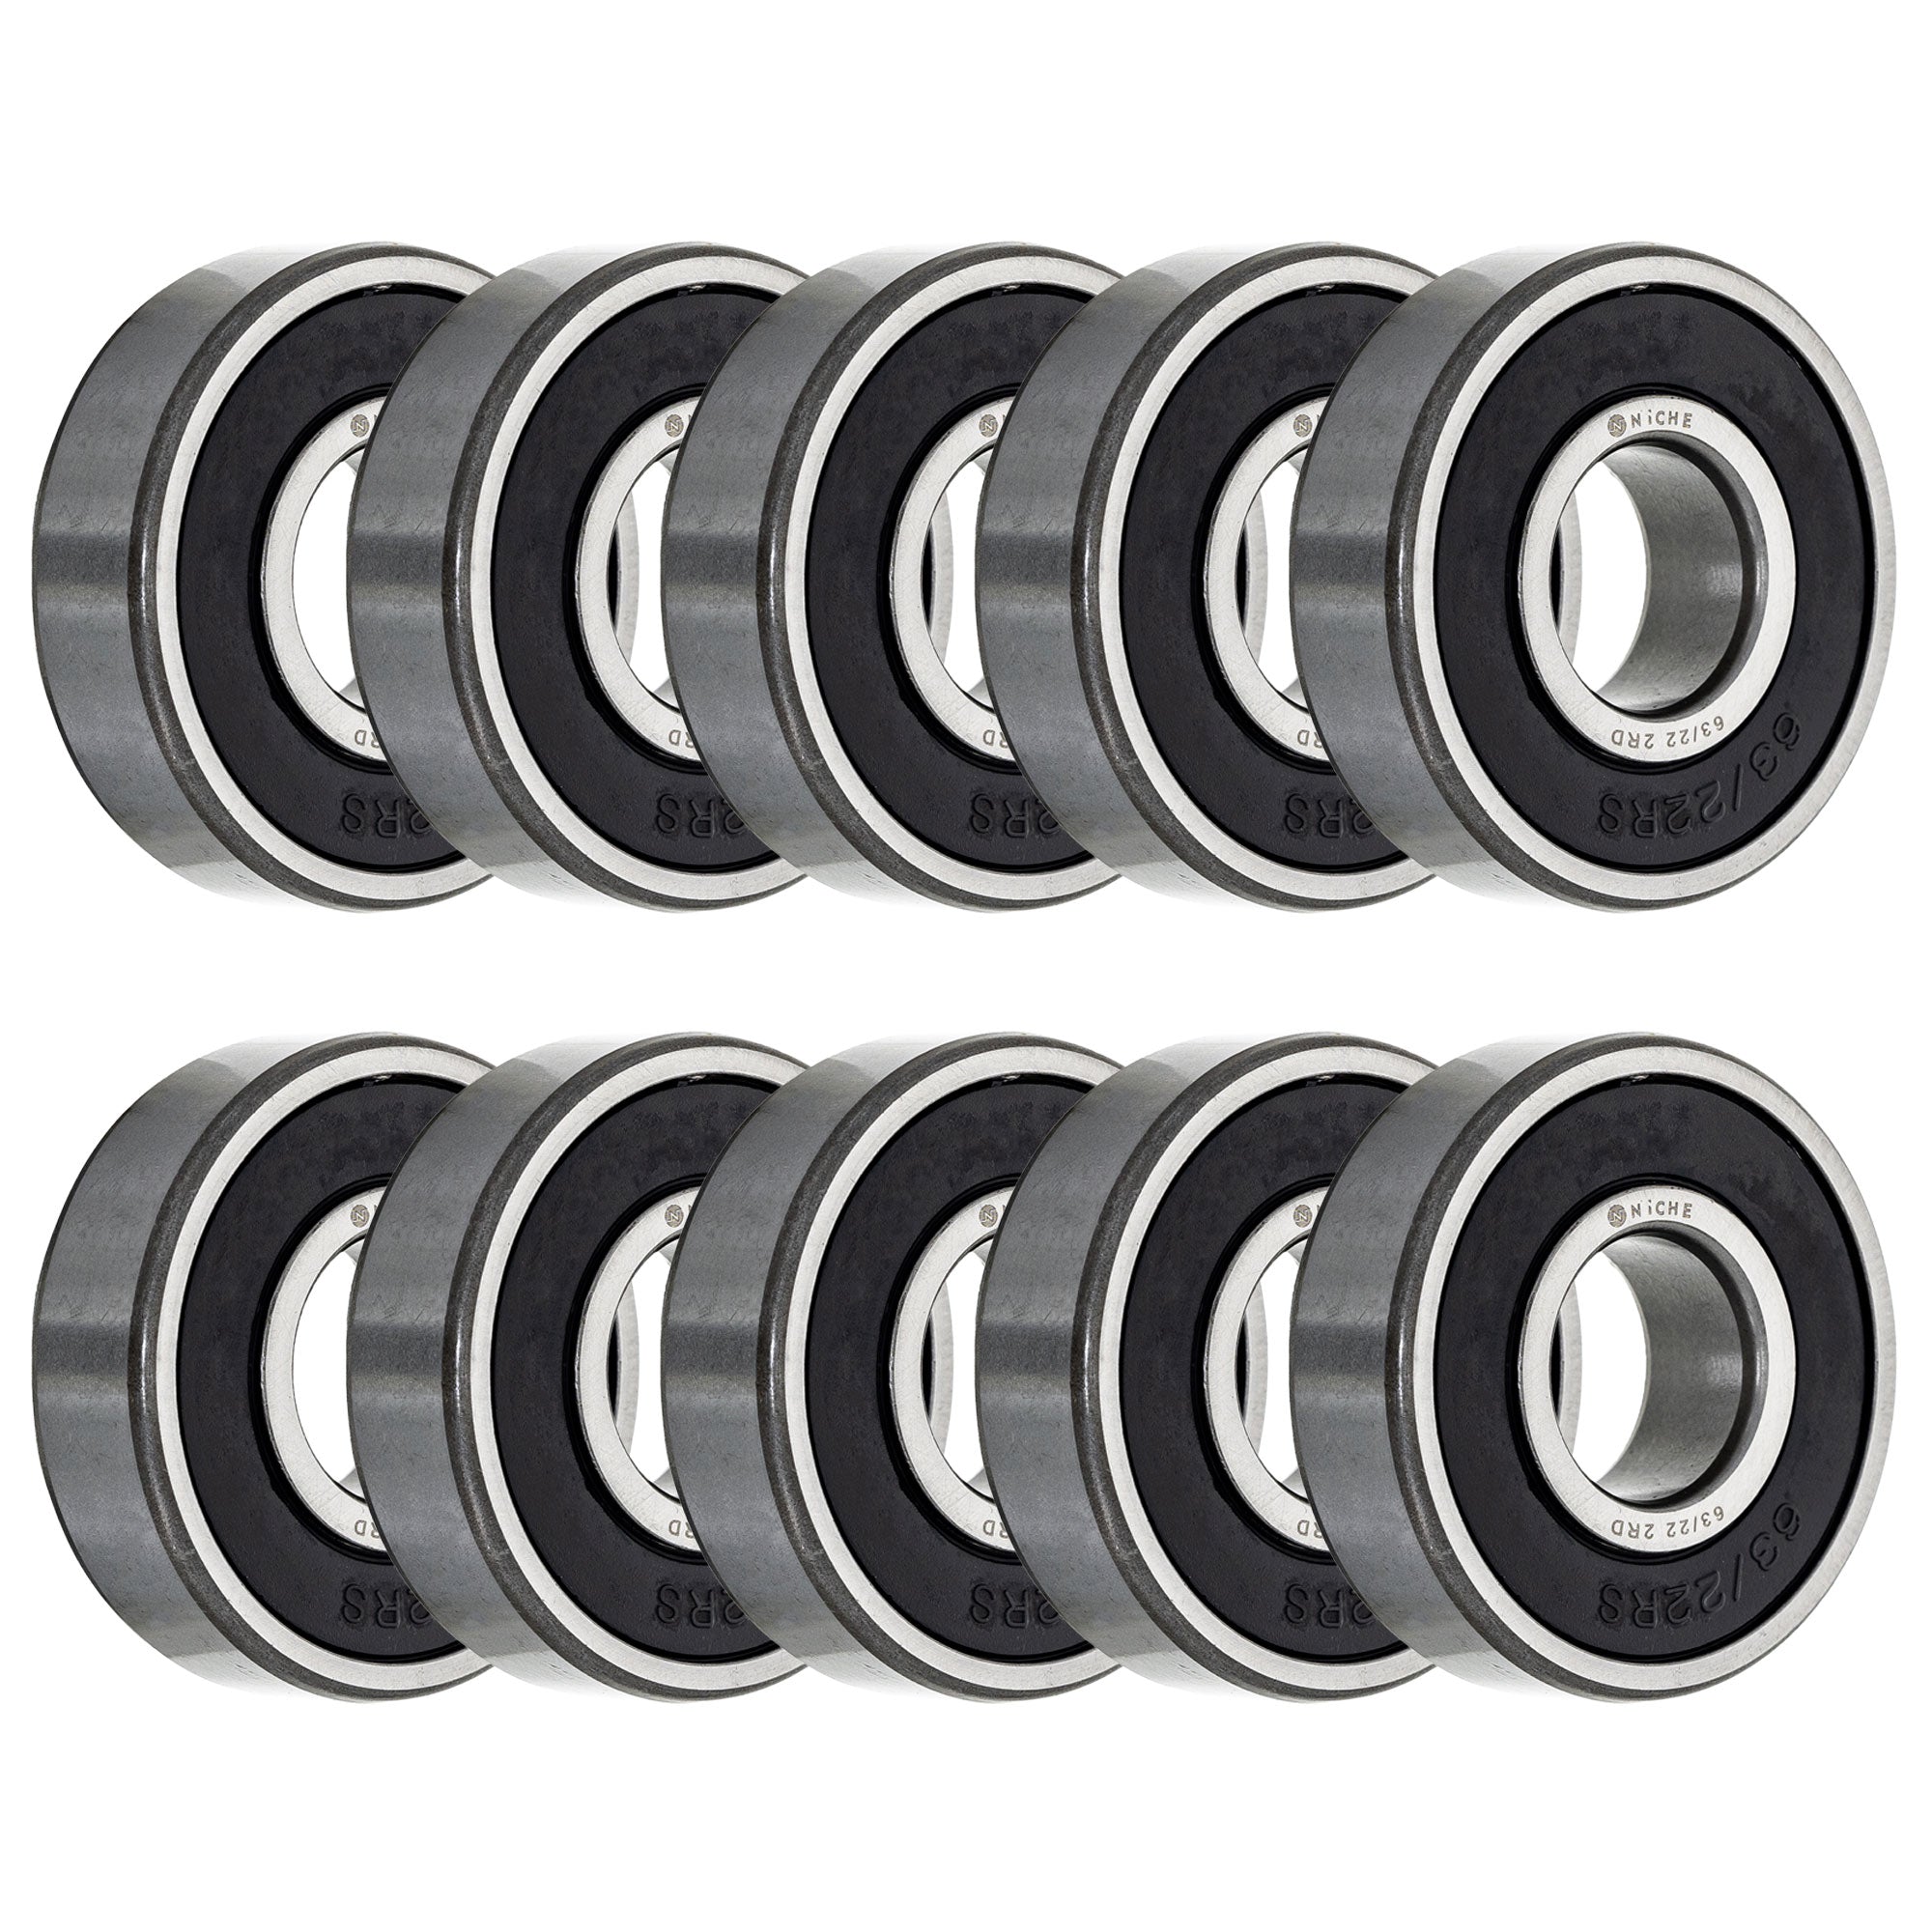 Electric Grade, Single Row, Deep Groove, Ball Bearing Pack of 10 10-Pack for zOTHER TDM850 NICHE 519-CBB2286R